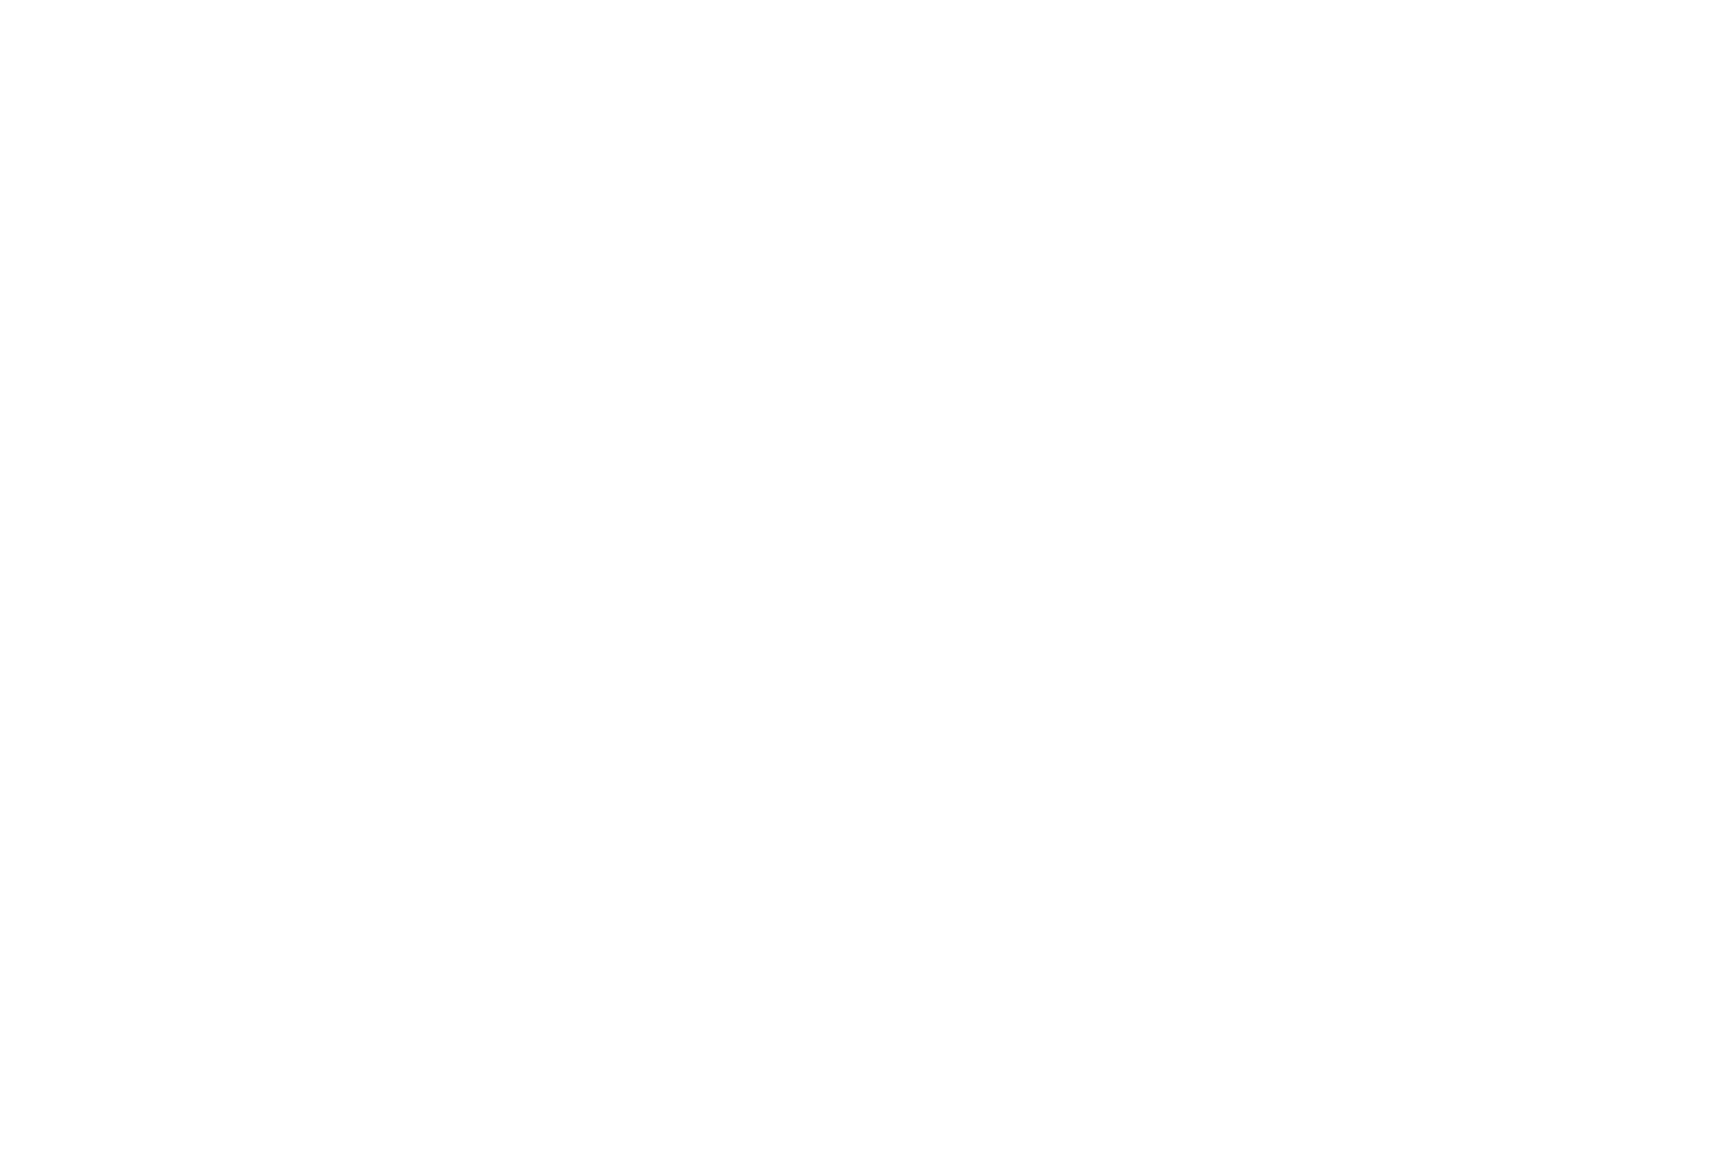 OFFICIAL SELECTION - NEW YORK STATE INTERNATIONAL FILM FESTIVAL - 2020.png